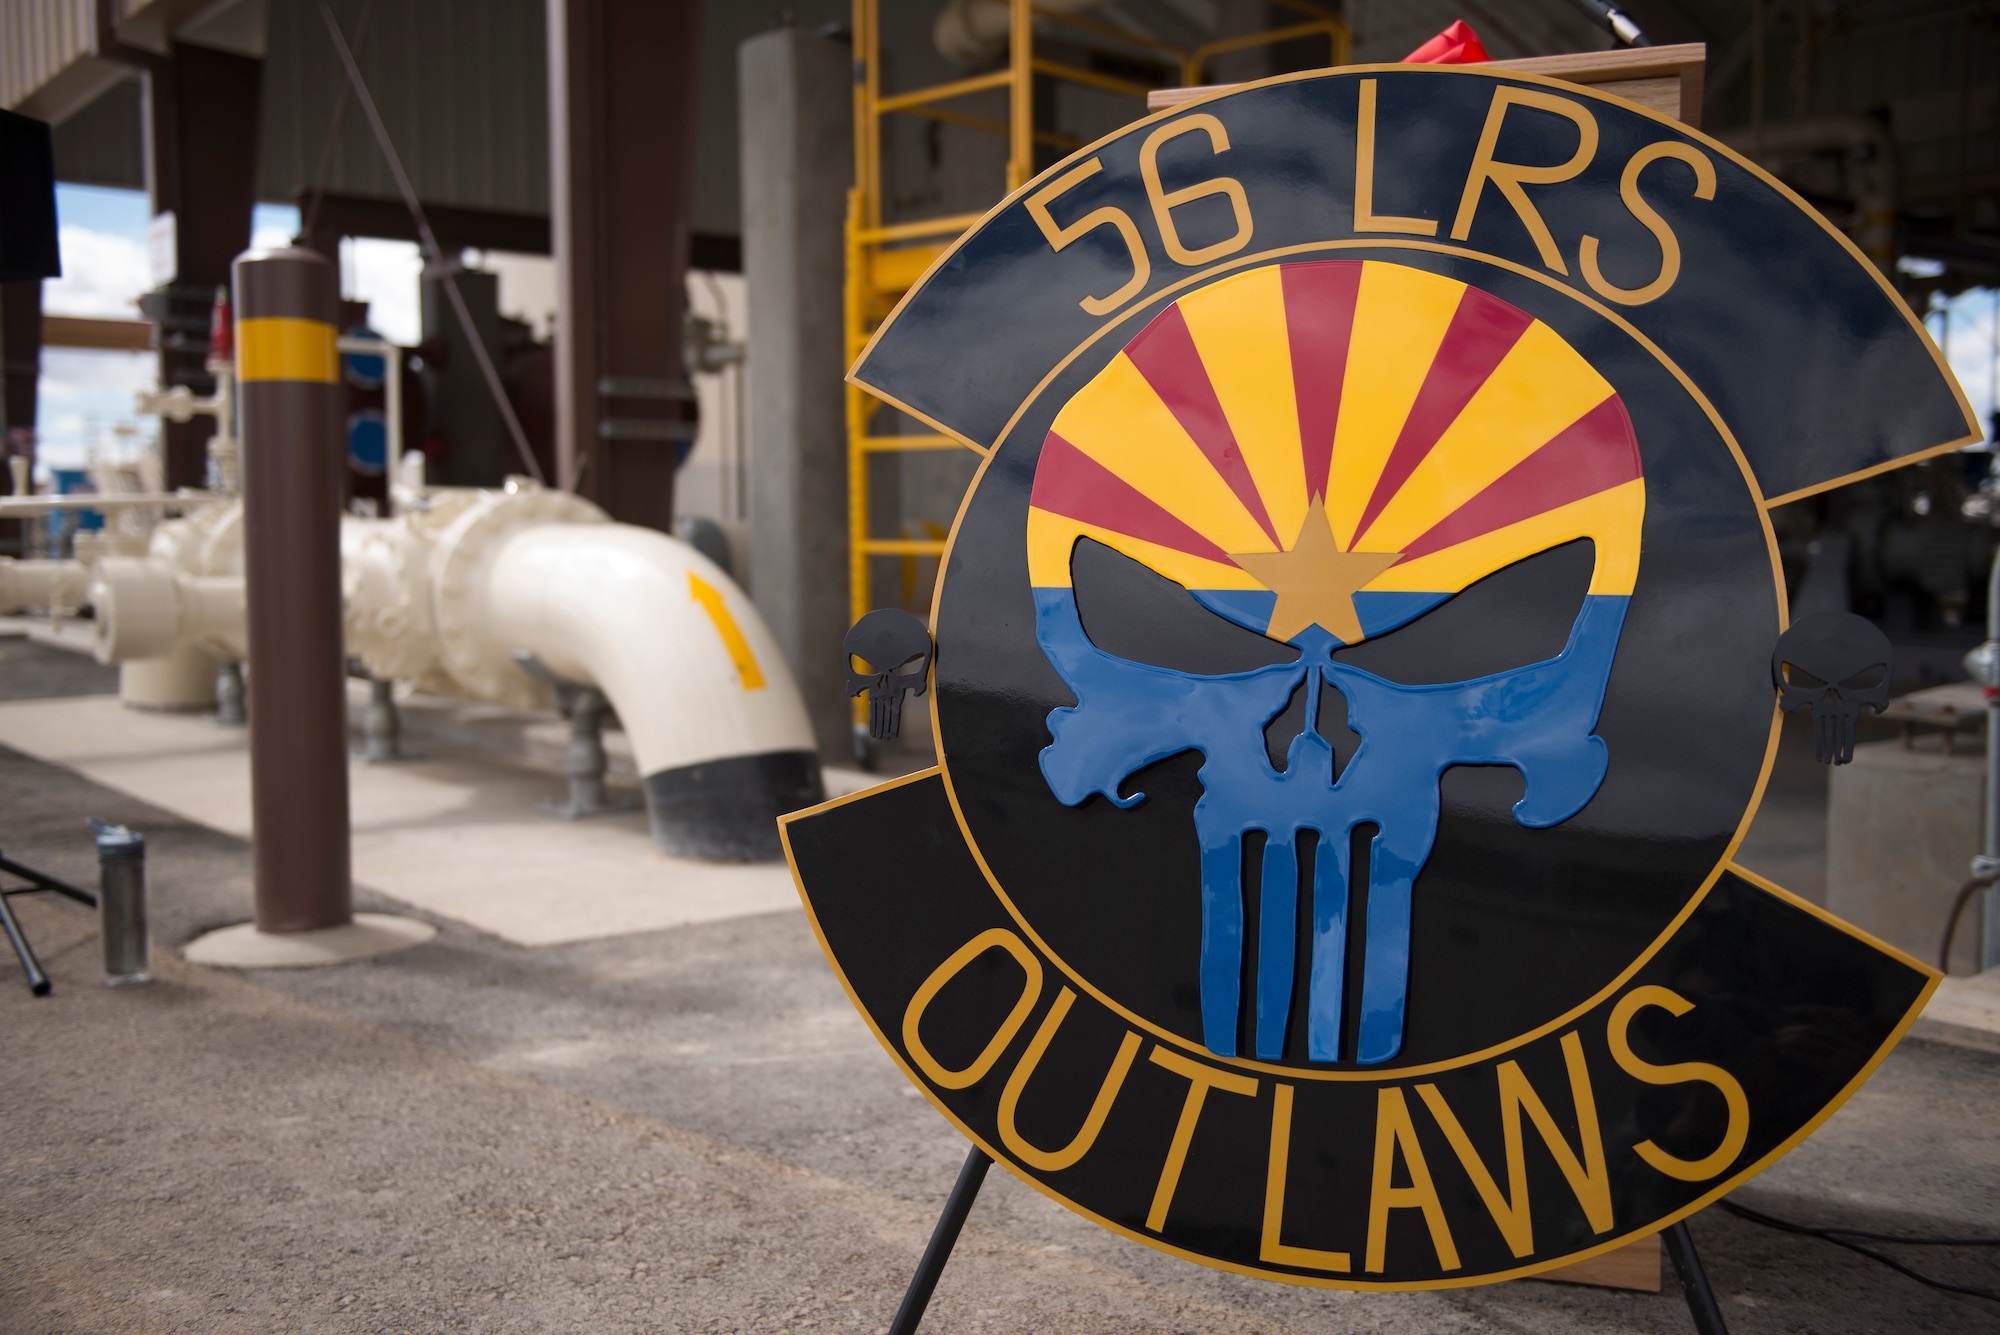 The 56th Logistics Readiness Squadron emblem sits in front of the new fuel pump house during its ribbon cutting ceremony at Luke Air Force Base, Ariz., March 15, 2018. The pump house and an adjacent fill house on the flight line is expected to save fuel management operators significant time and speed up the jet refuel and sortie rate. (U.S. Air Force photo by Senior Airman Ridge Shan)